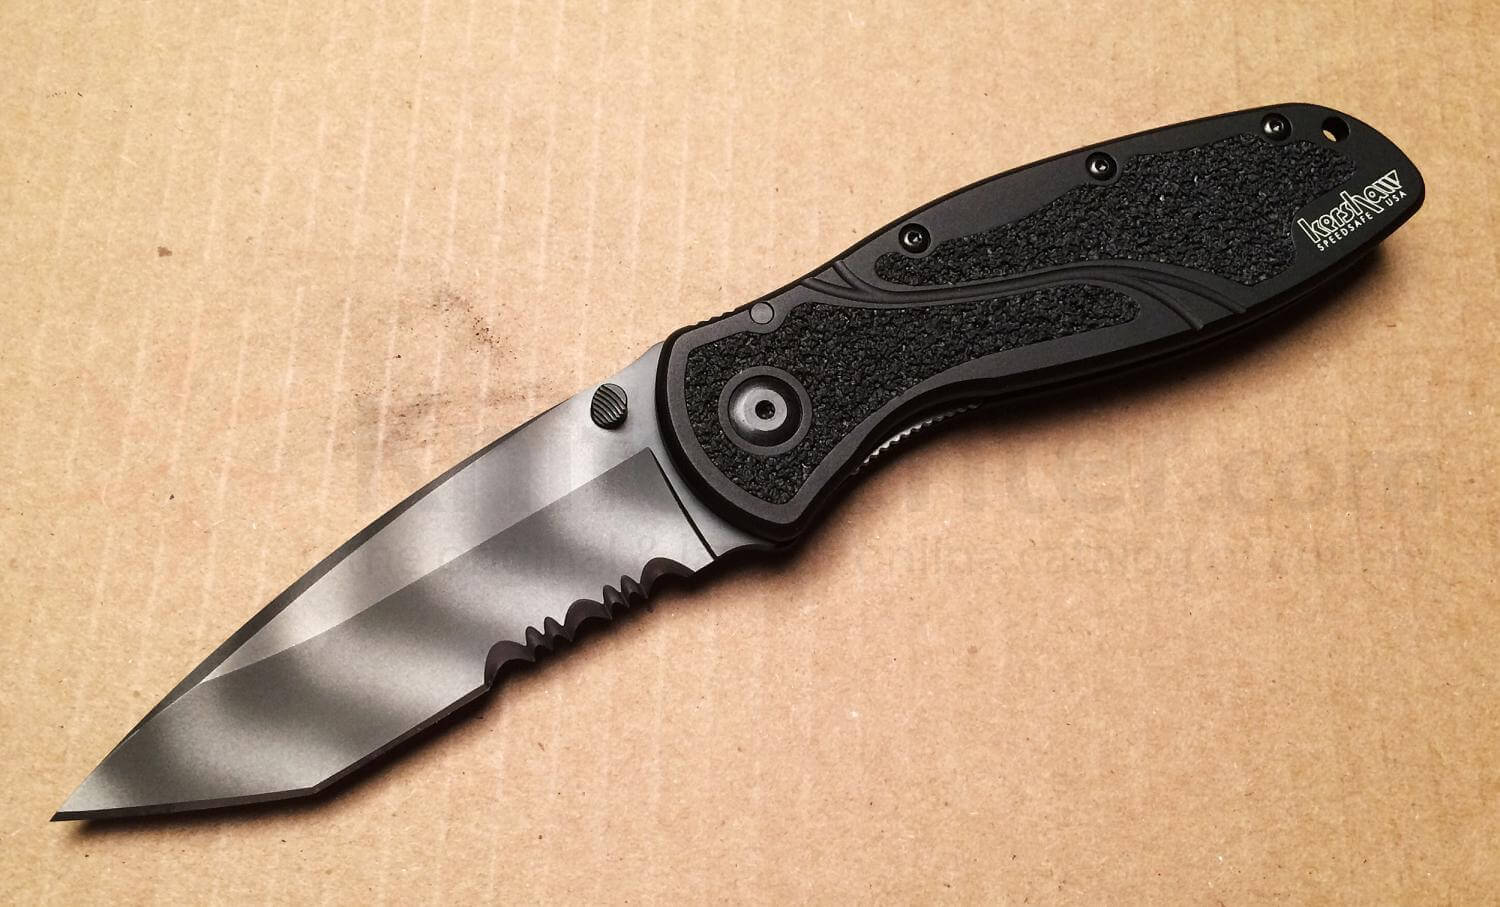 Kershaw Ken Onion Tactical Blur Folding Knife Review The Tactical Experts